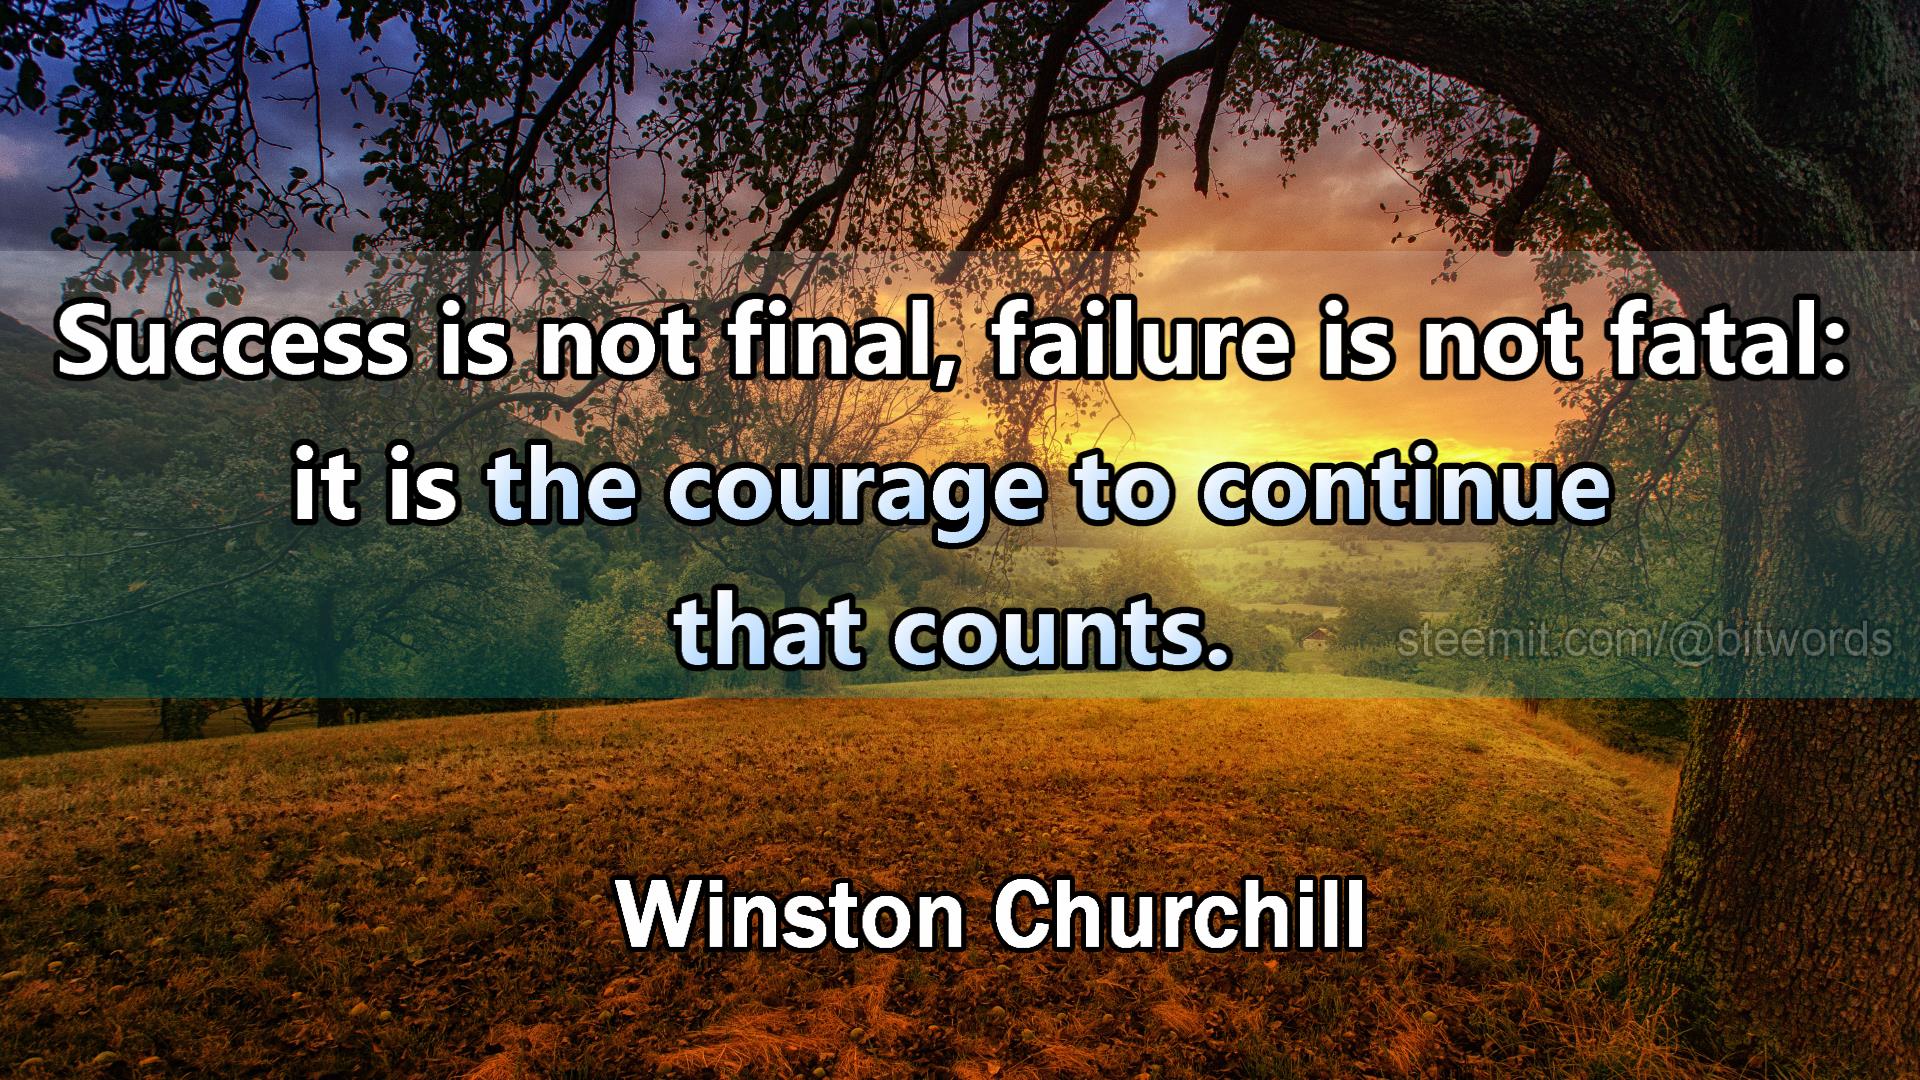 bitwords quotes inspirational by winston churchill (9).jpg